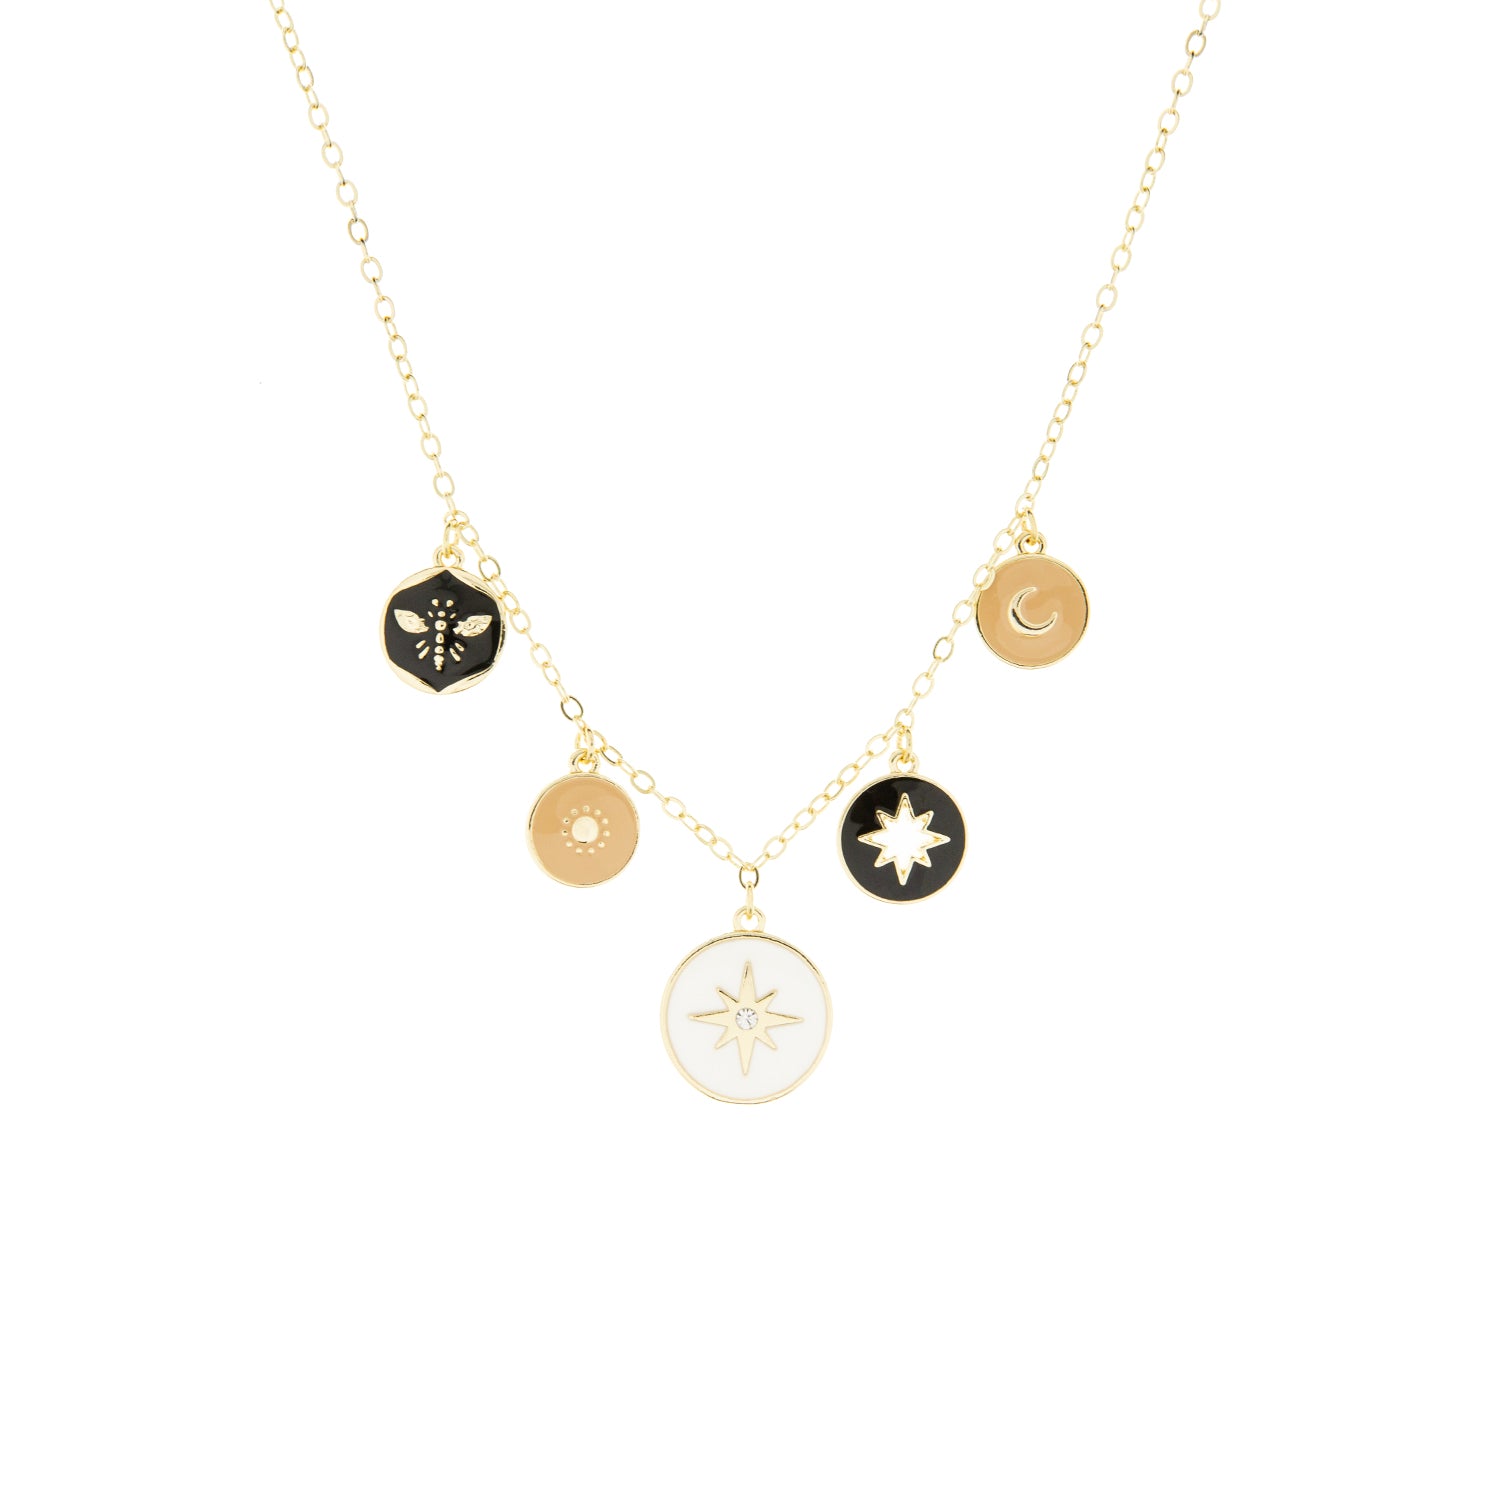 gold plated delicate layered chain with enamel colored charms – Marlyn  Schiff, LLC